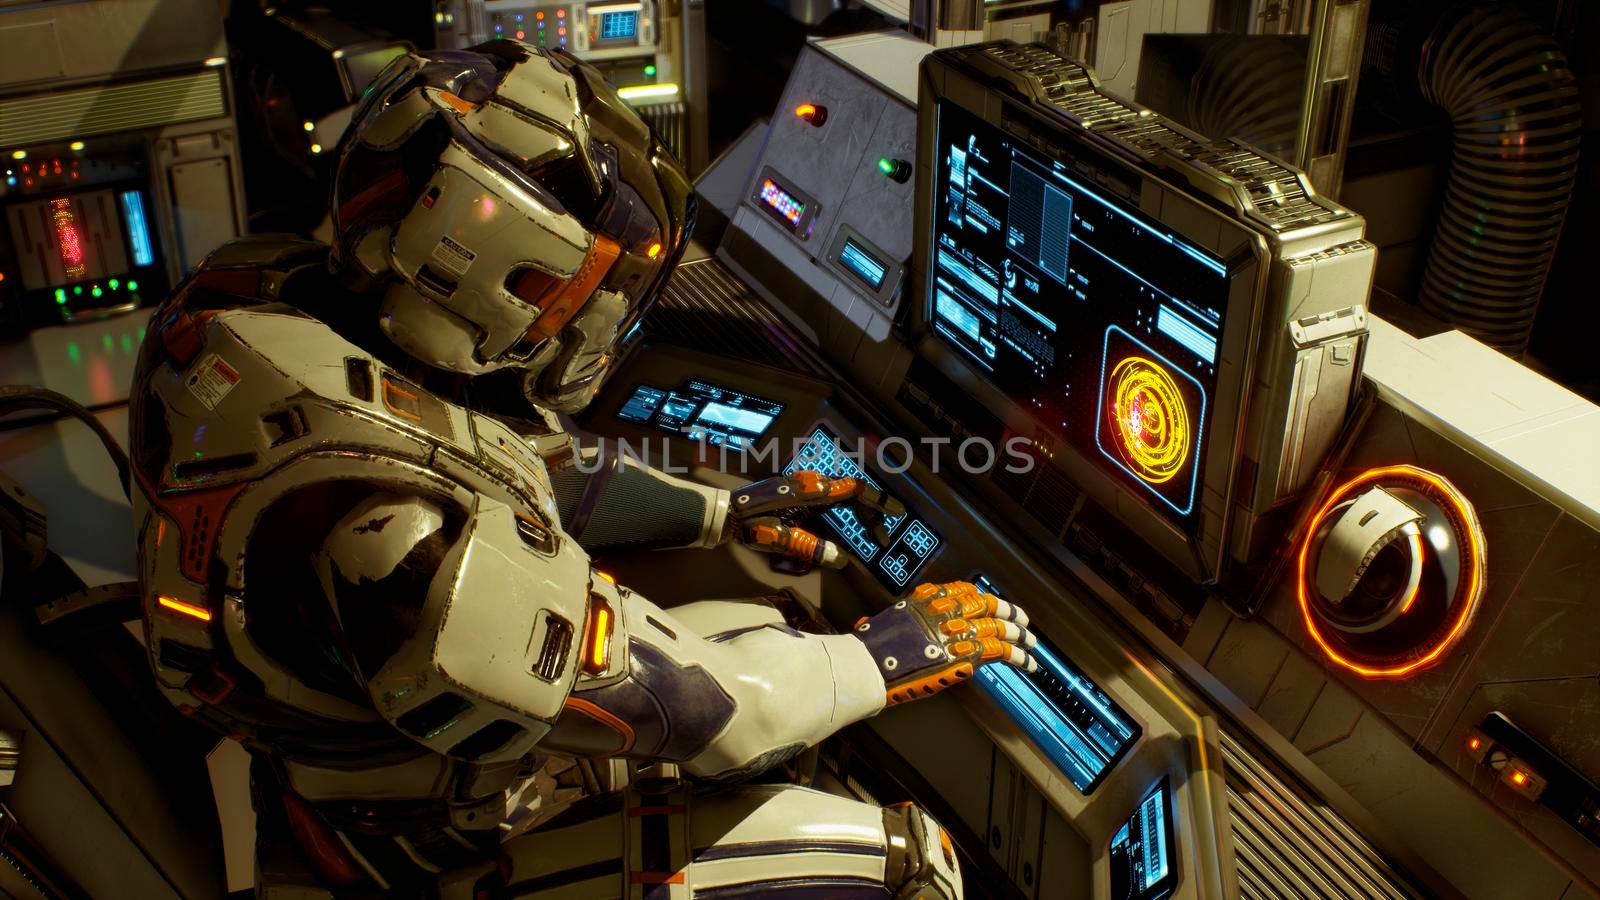 The astronaut on his spaceship running on a computer